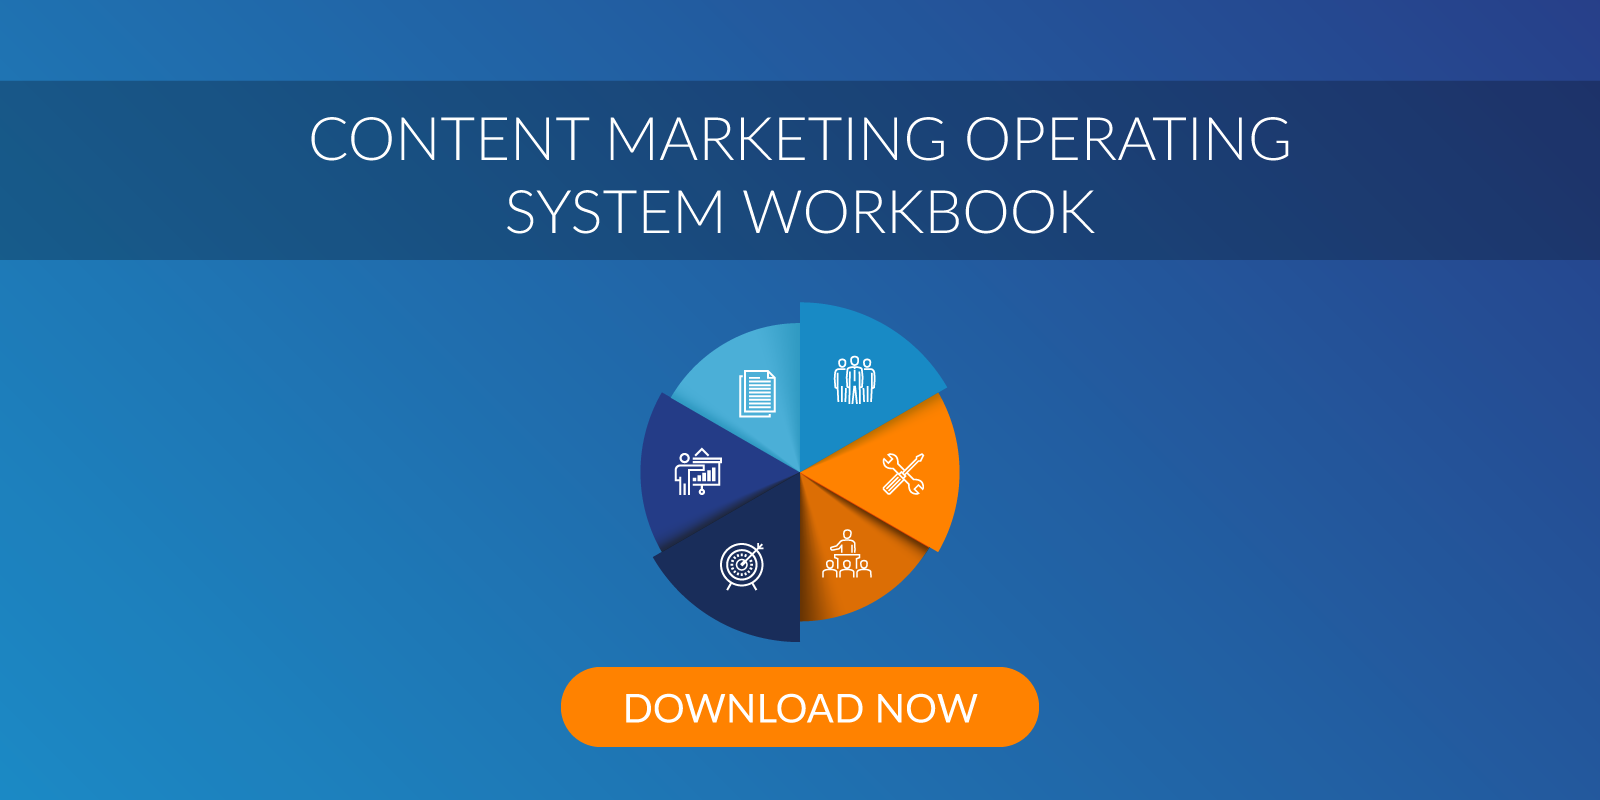 Download the Content Marketing Operating System Workbook